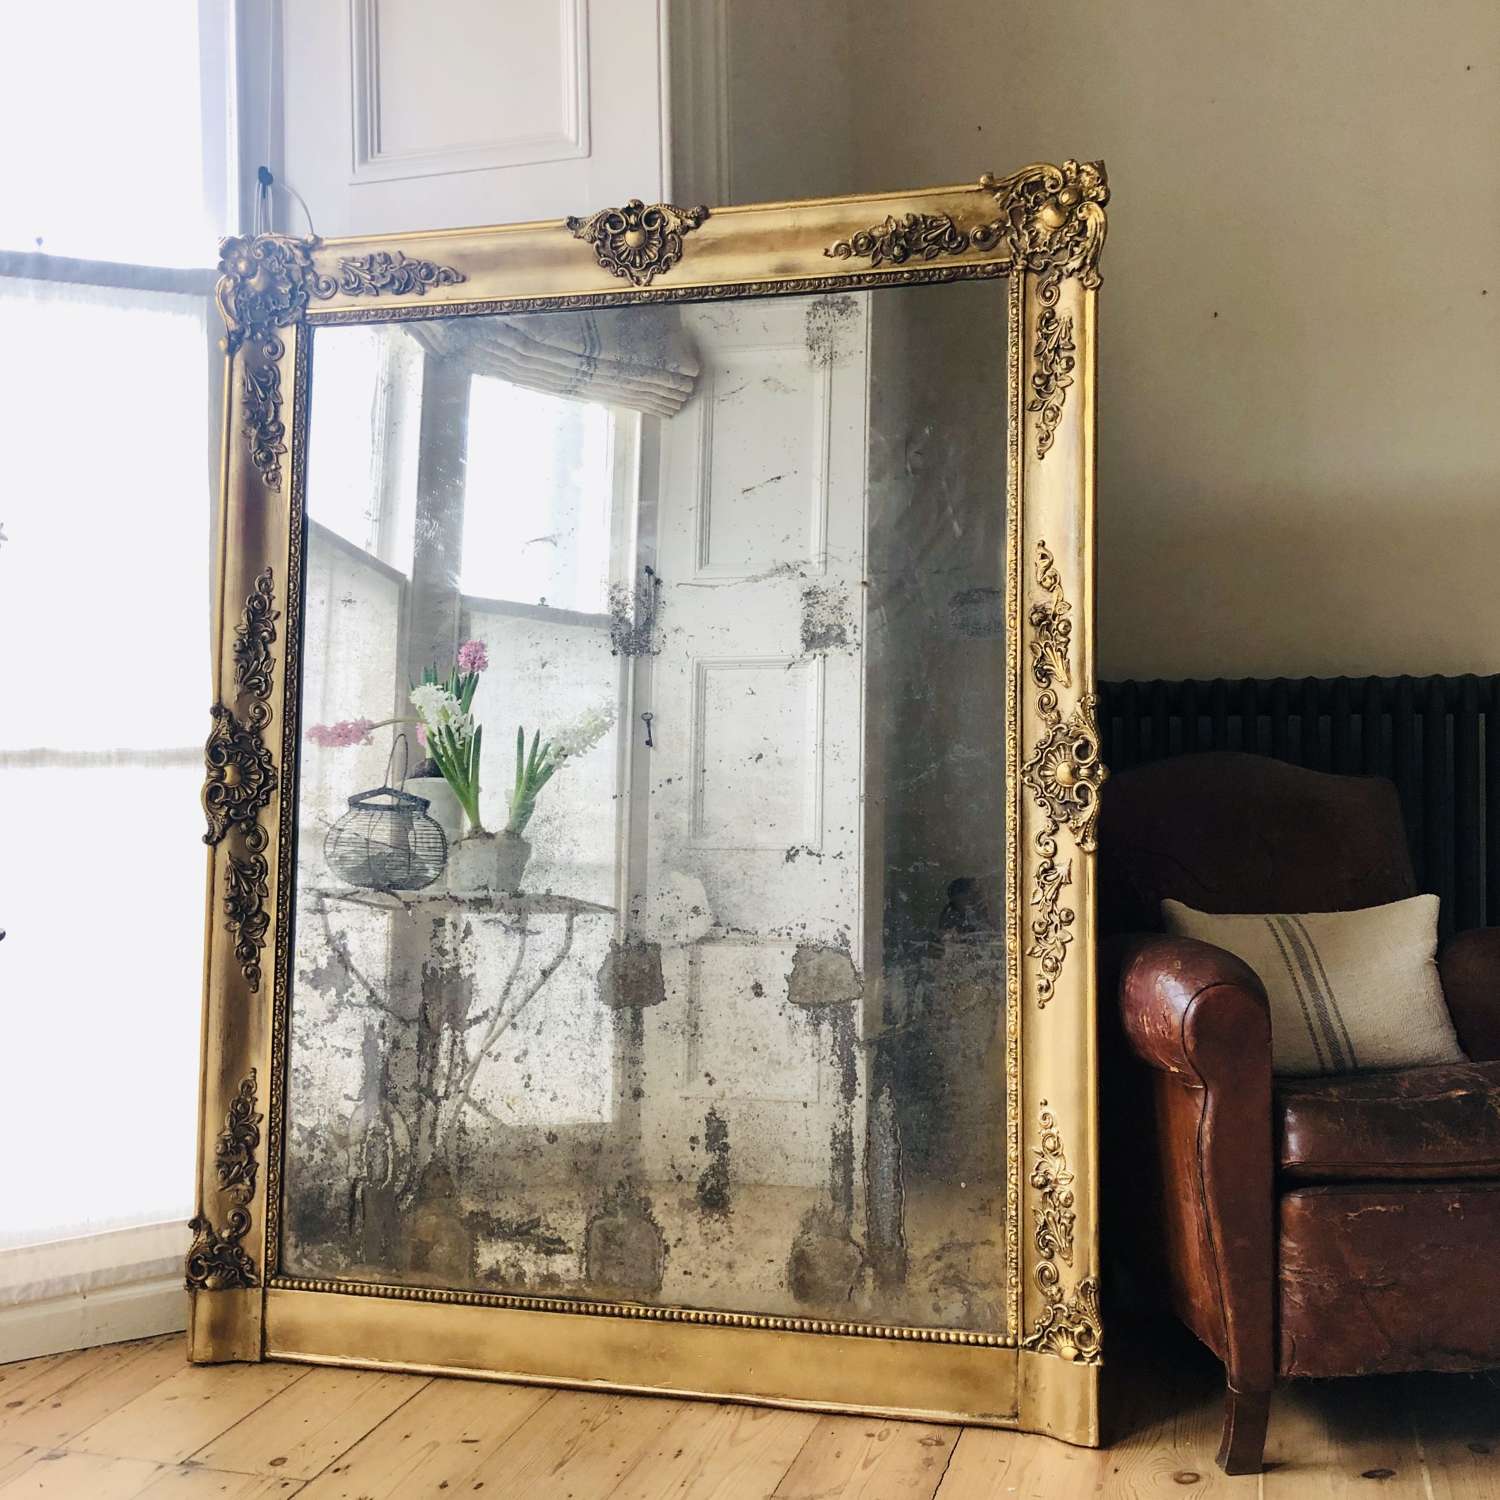 Large French antique gilt mirror - foxed / distressed mercury glass